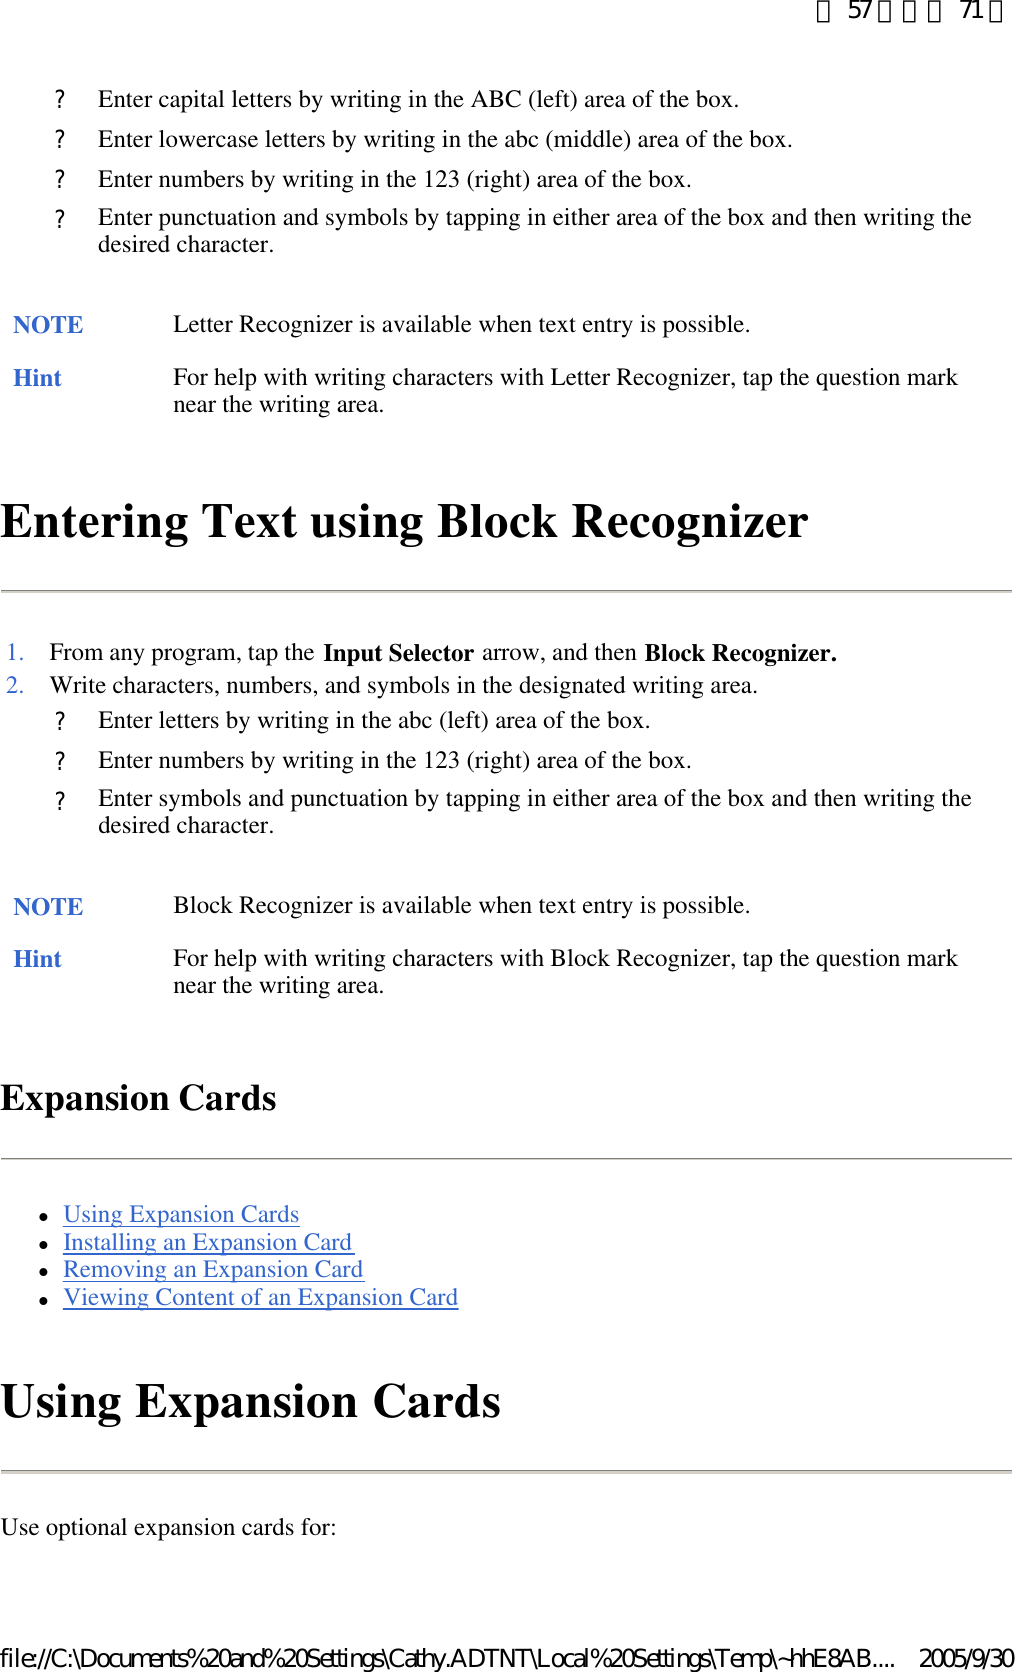 Entering Text using Block Recognizer  Expansion Cards lUsing Expansion Cards  lInstalling an Expansion Card  lRemoving an Expansion Card  lViewing Content of an Expansion Card  Using Expansion Cards Use optional expansion cards for: ?Enter capital letters by writing in the ABC (left) area of the box. ?Enter lowercase letters by writing in the abc (middle) area of the box. ?Enter numbers by writing in the 123 (right) area of the box. ?Enter punctuation and symbols by tapping in either area of the box and then writing the desired character. NOTE Letter Recognizer is available when text entry is possible. Hint For help with writing characters with Letter Recognizer, tap the question mark near the writing area.  1. From any program, tap the Input Selector arrow, and then Block Recognizer.2. Write characters, numbers, and symbols in the designated writing area. ?Enter letters by writing in the abc (left) area of the box. ?Enter numbers by writing in the 123 (right) area of the box. ?Enter symbols and punctuation by tapping in either area of the box and then writing the desired character. NOTE Block Recognizer is available when text entry is possible. Hint For help with writing characters with Block Recognizer, tap the question mark near the writing area.  第 57 頁，共 71 頁2005/9/30file://C:\Documents%20and%20Settings\Cathy.ADTNT\Local%20Settings\Temp\~hhE8AB....